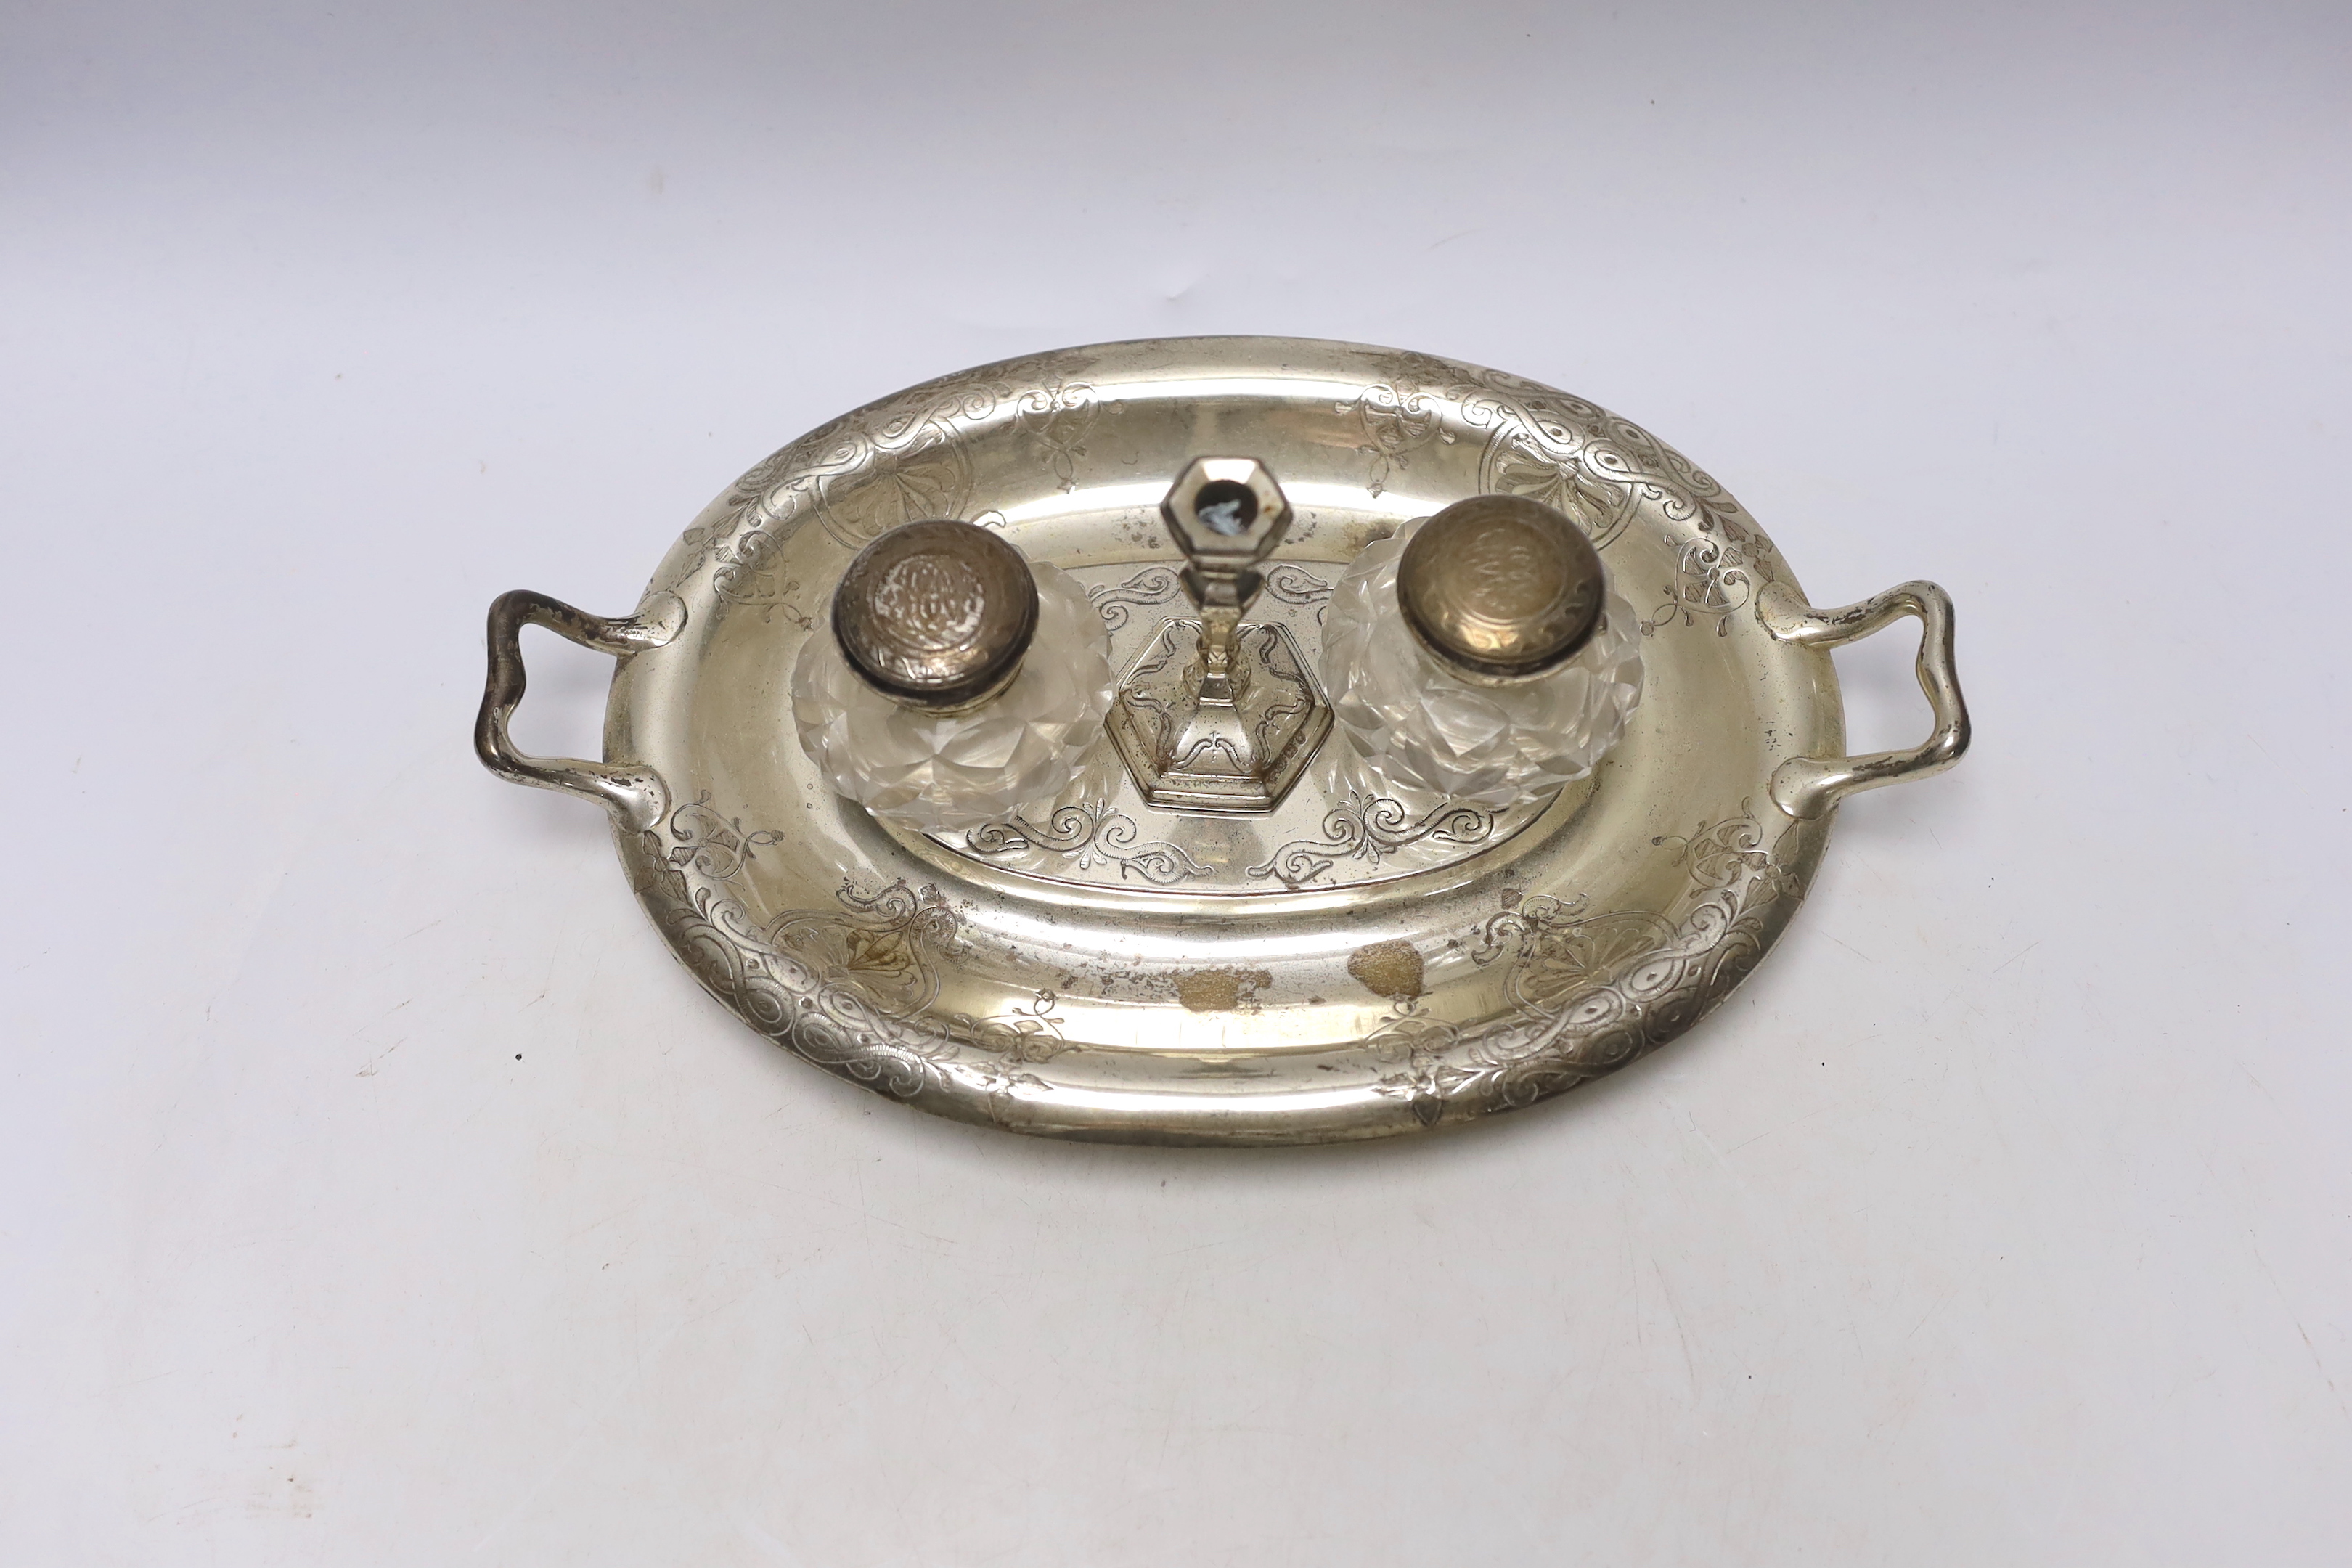 A Victorian engraved silver oval two handled inkstand, with two mounted glass wells and a taperstick, on four scroll feet, Henry Wilkinson & Co Ltd, 1858, 30.4cm over handles, 15.6oz.